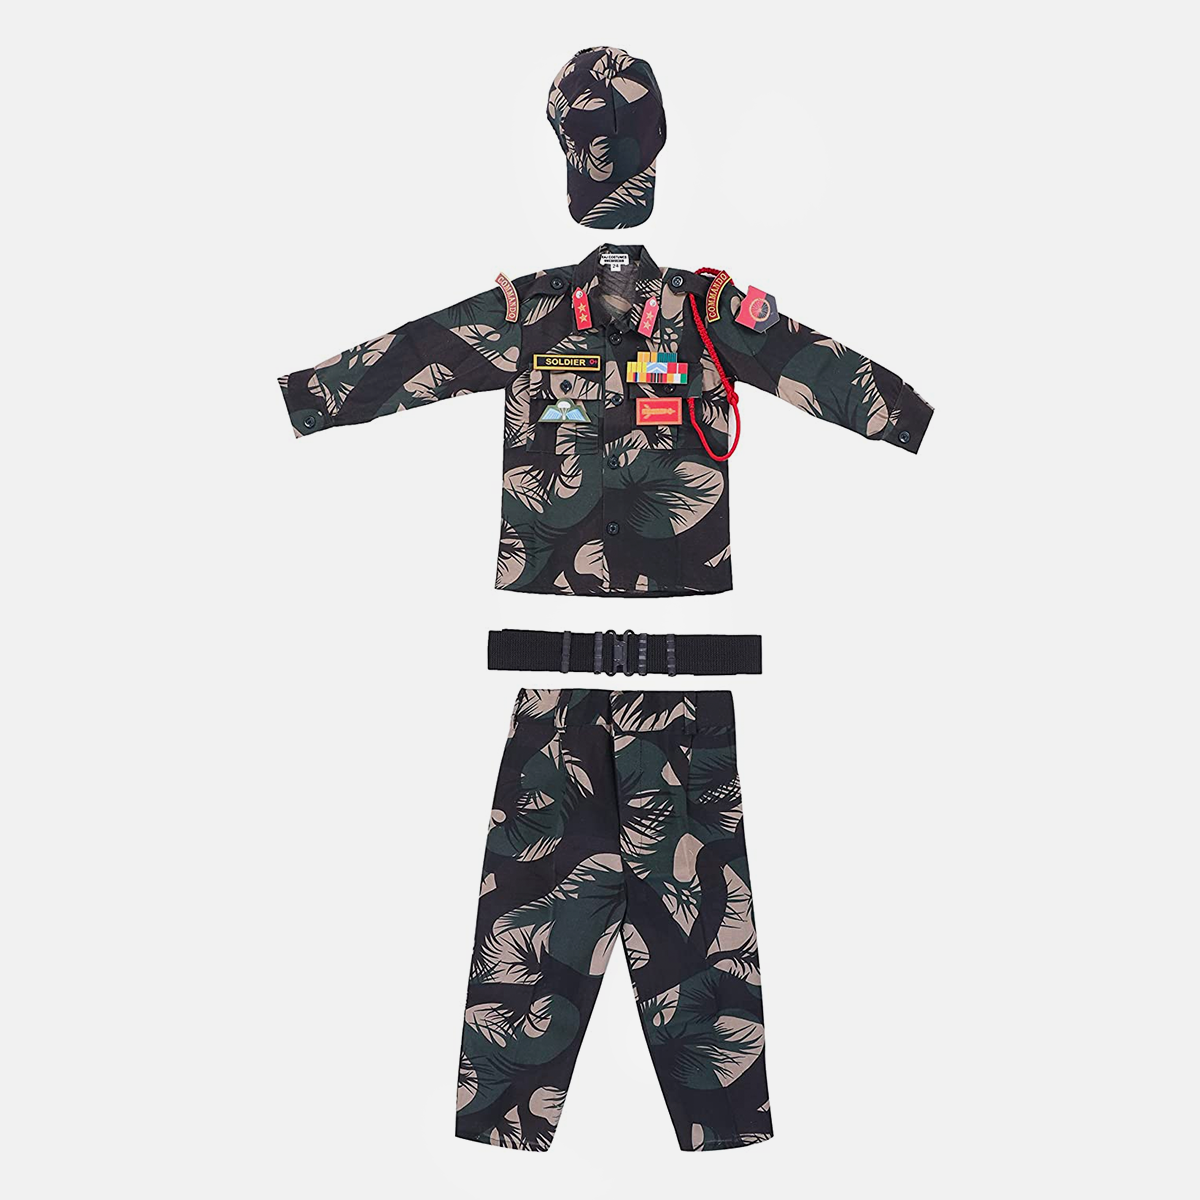 US Army Children's Deluxe Combat Military Soldier Role Play Dress Up,  Camouflage Costume Set with Cap for Boys Kids and Toddlers - Walmart.com